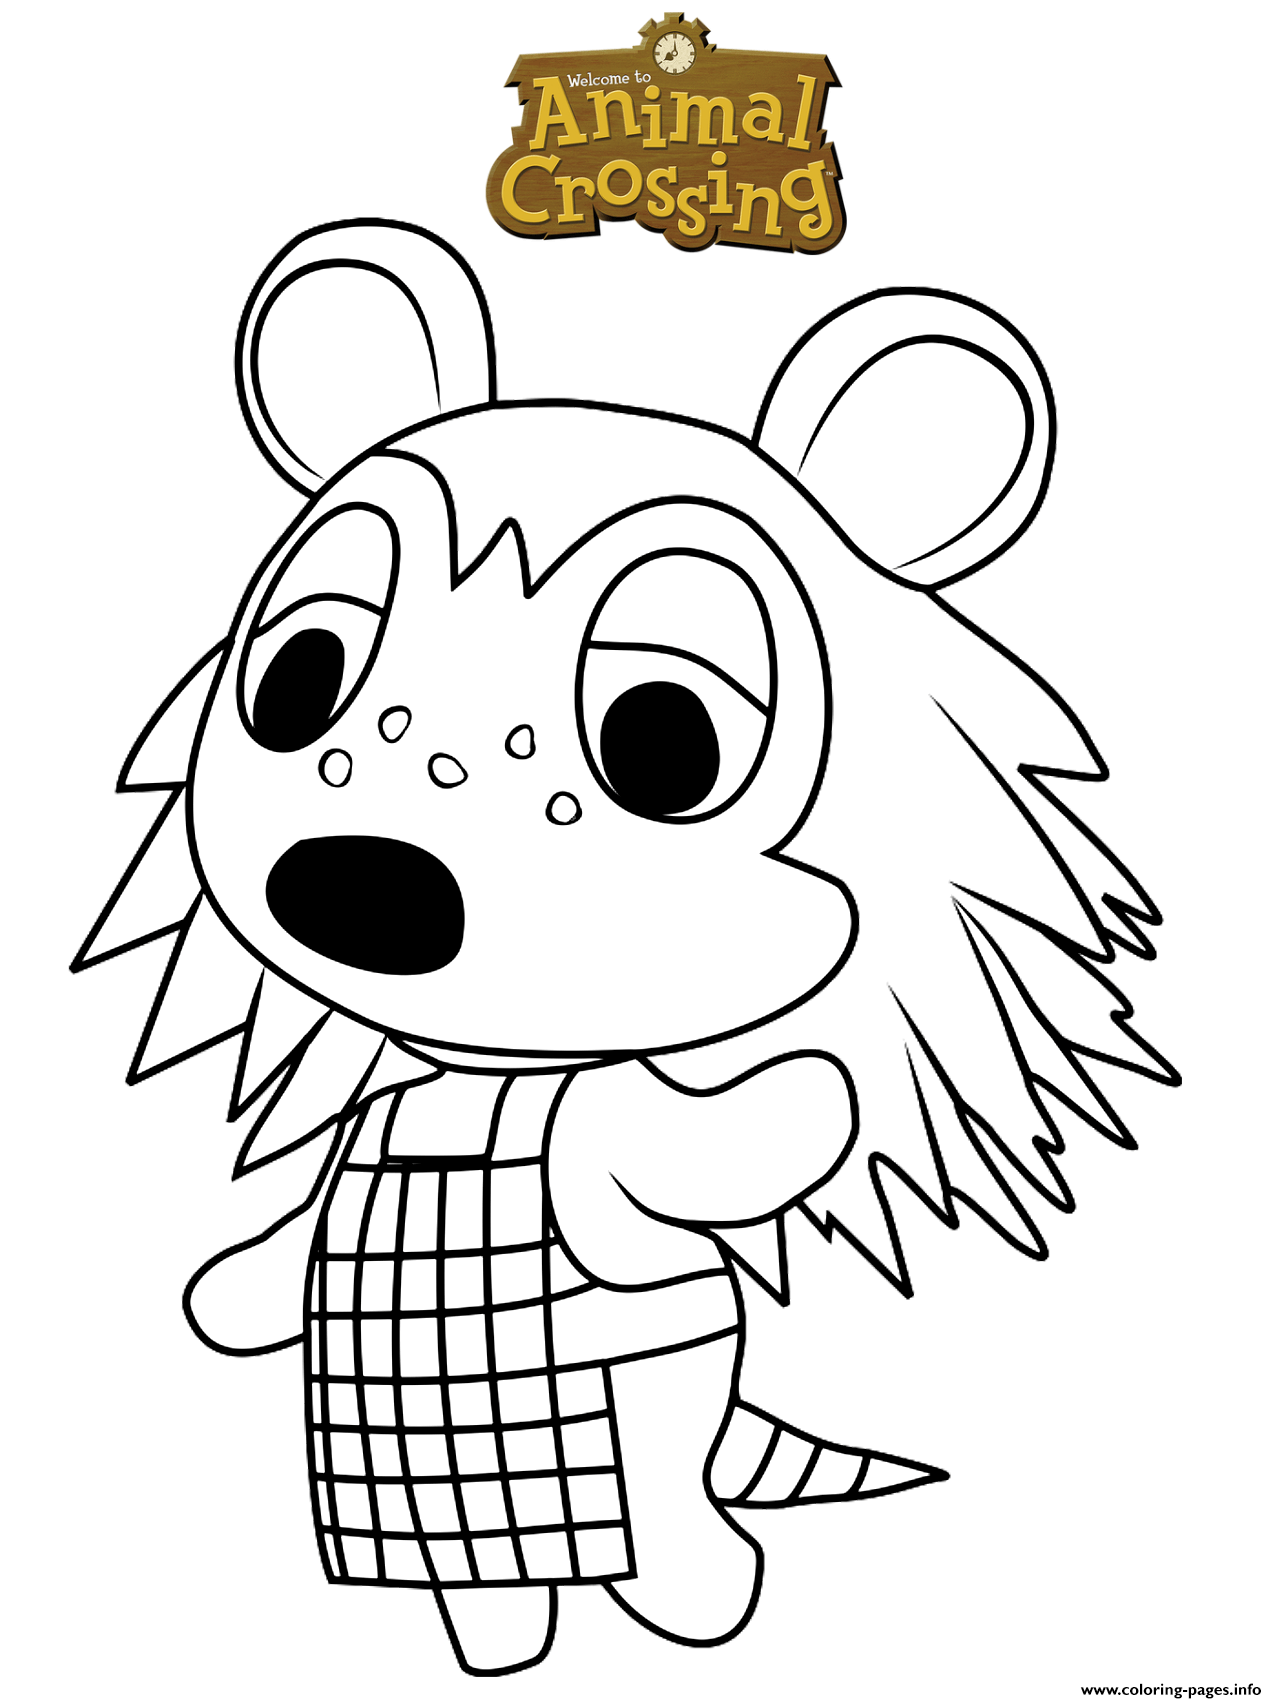 Crossing Animal Coloring Pages Colouring Characters Leaf Sheets ...